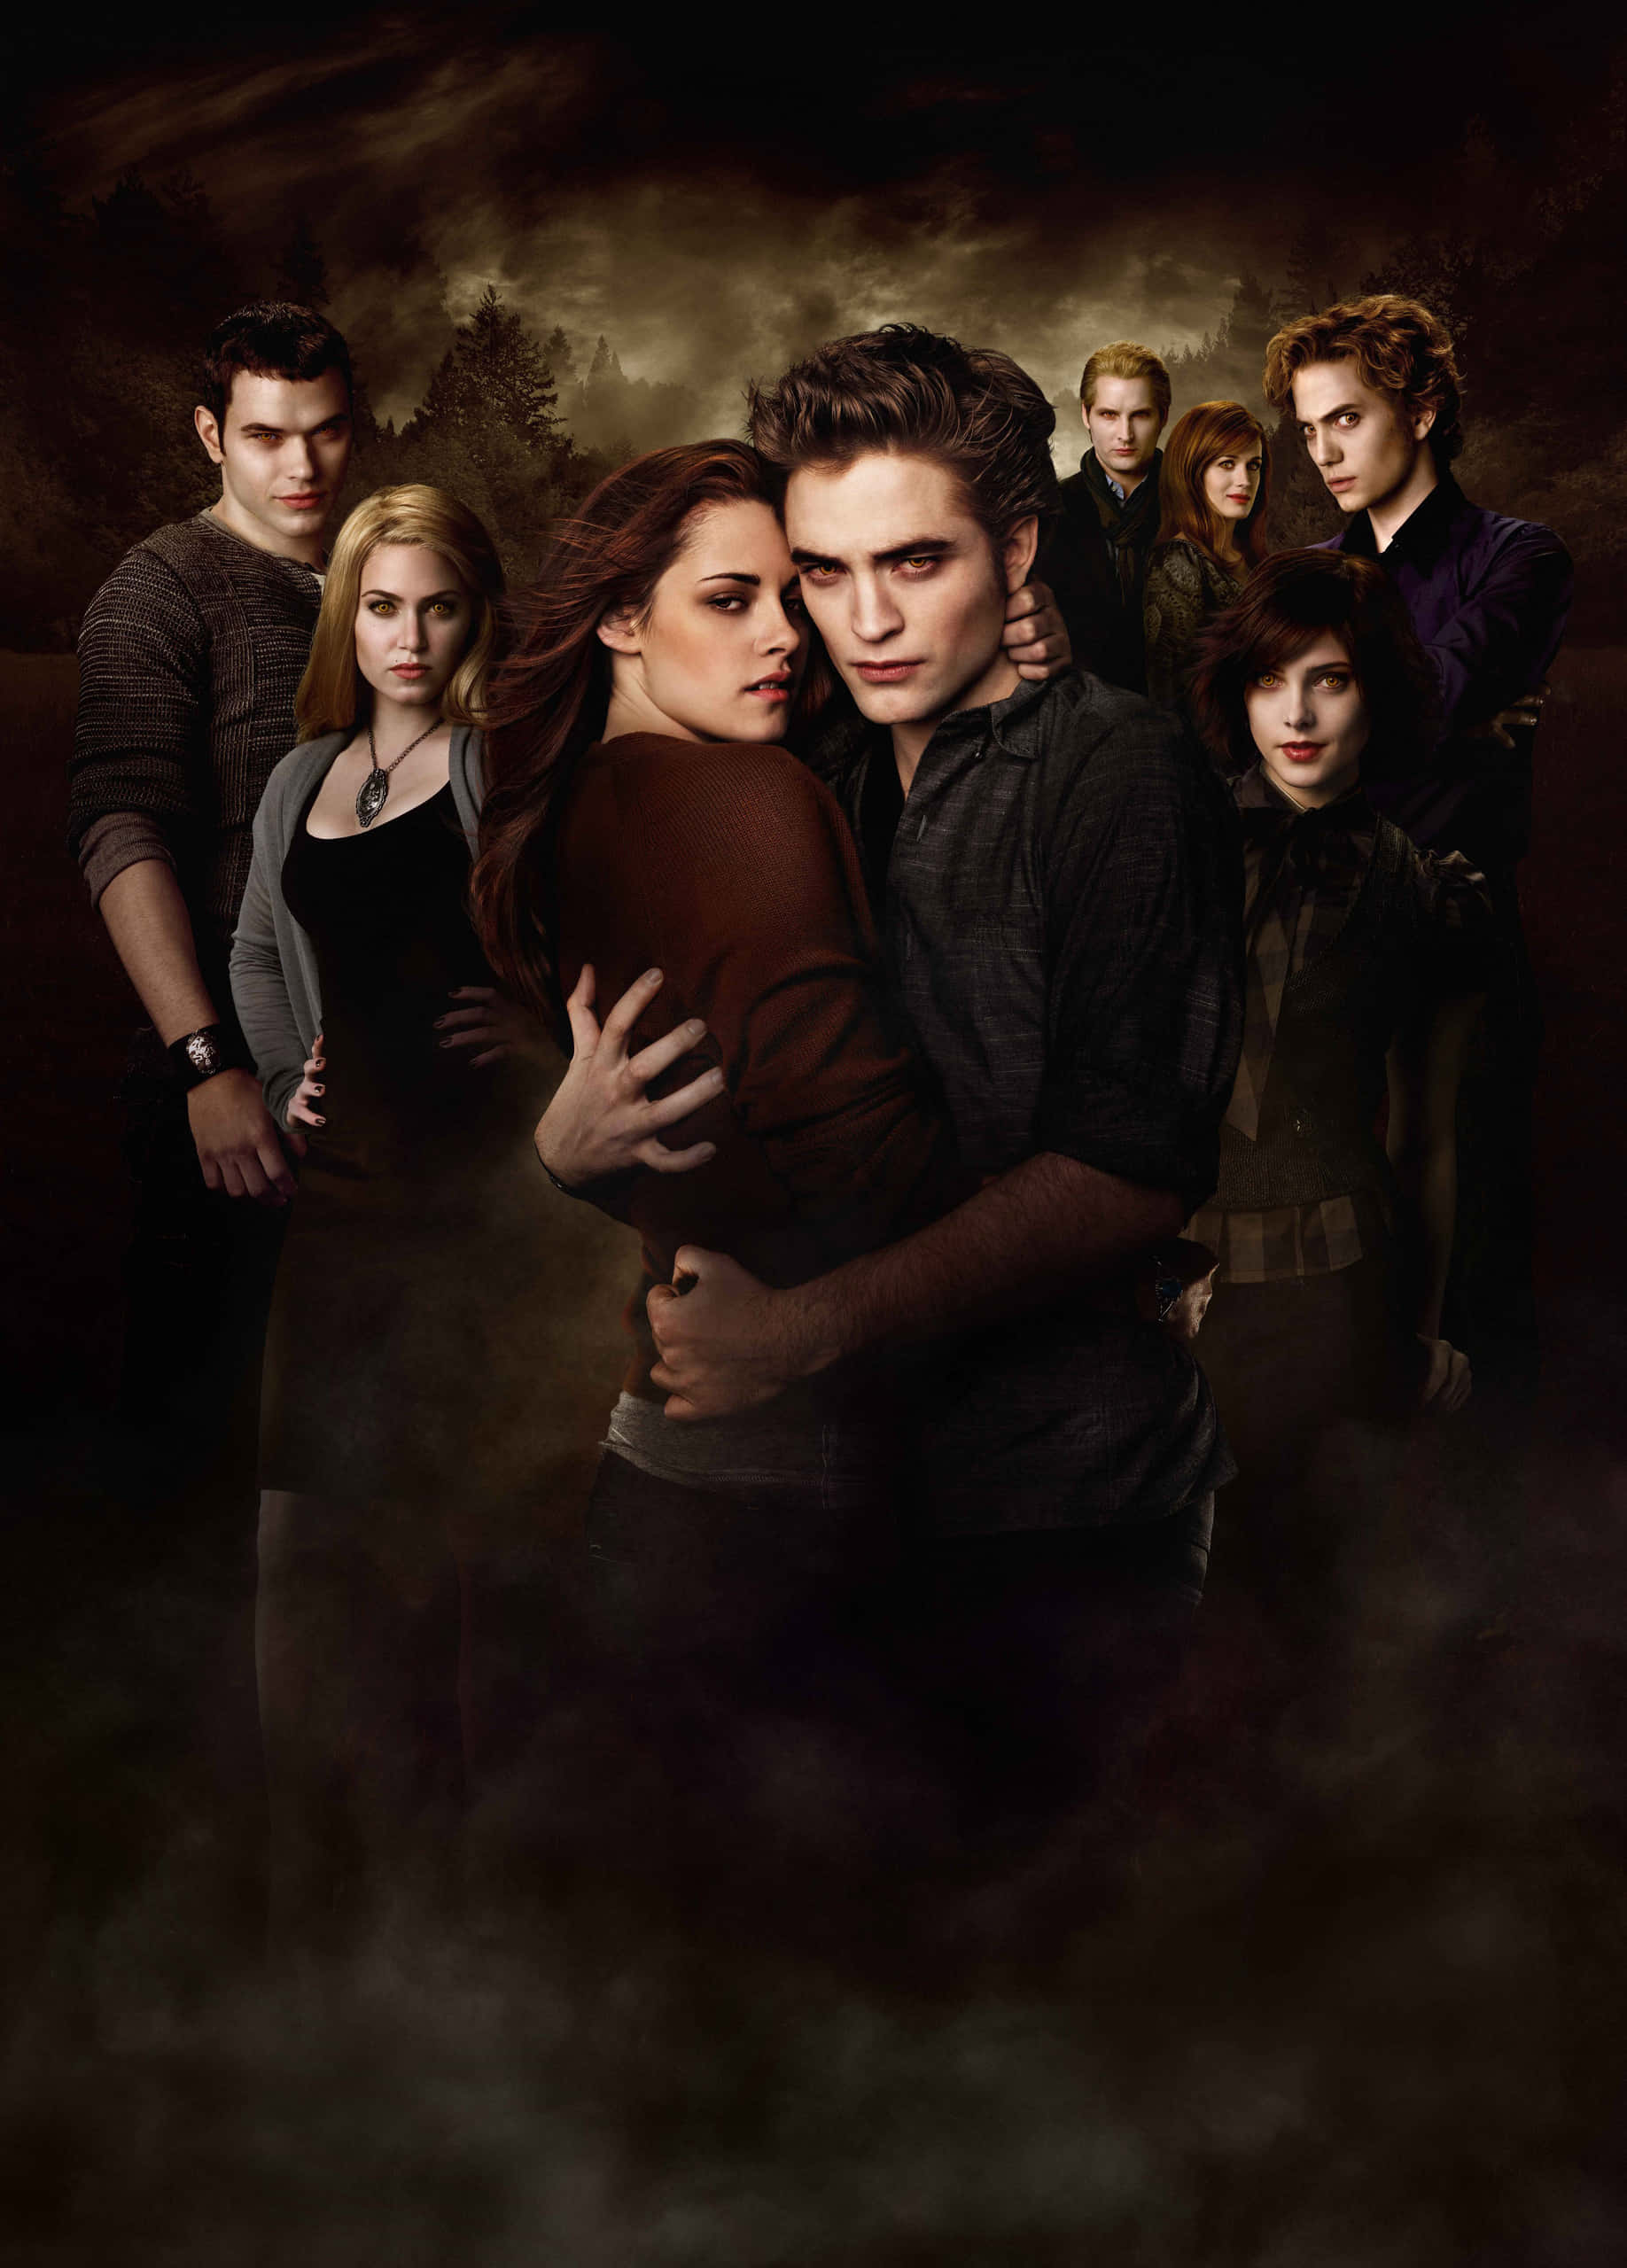 The Twilight Saga Poster With The Cast